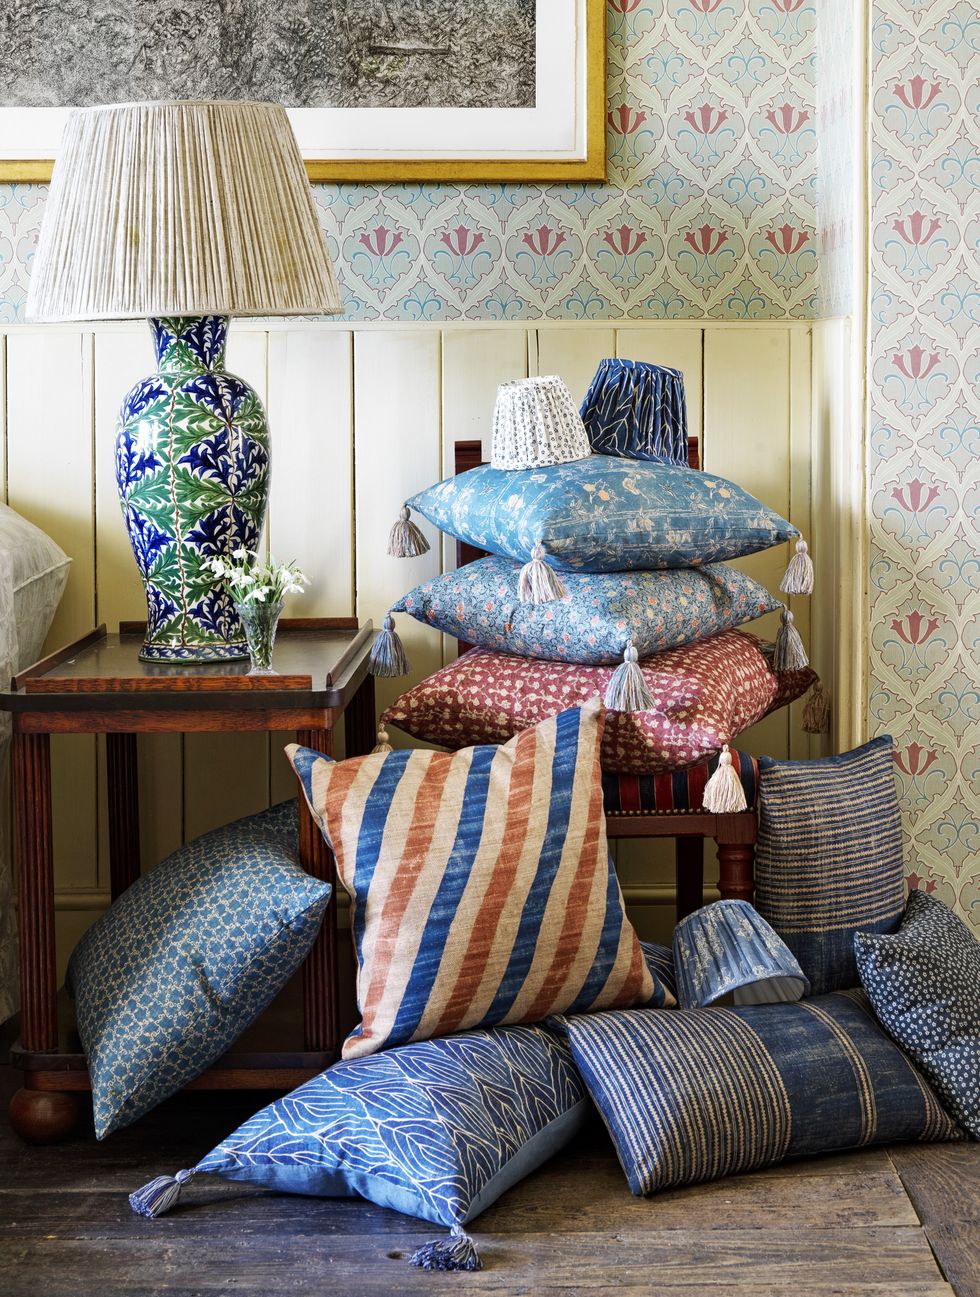 a stack and pile of pillows in different colorful patterns with a blue and green lamp on a table